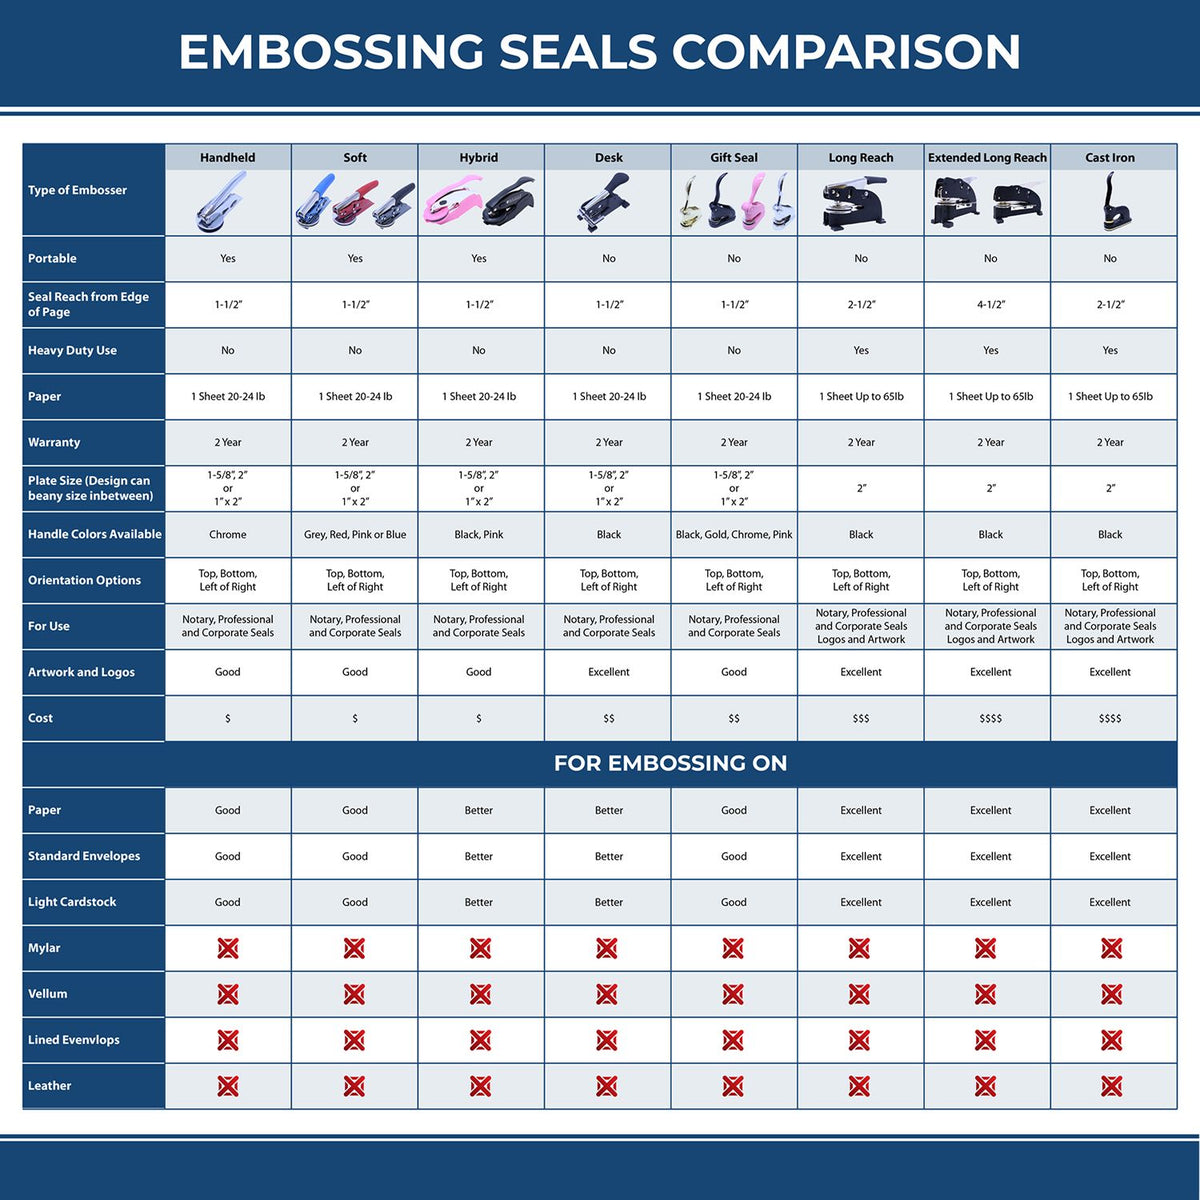 A comparison chart for the different types of mount models available for the Soft Kansas Professional Geologist Seal